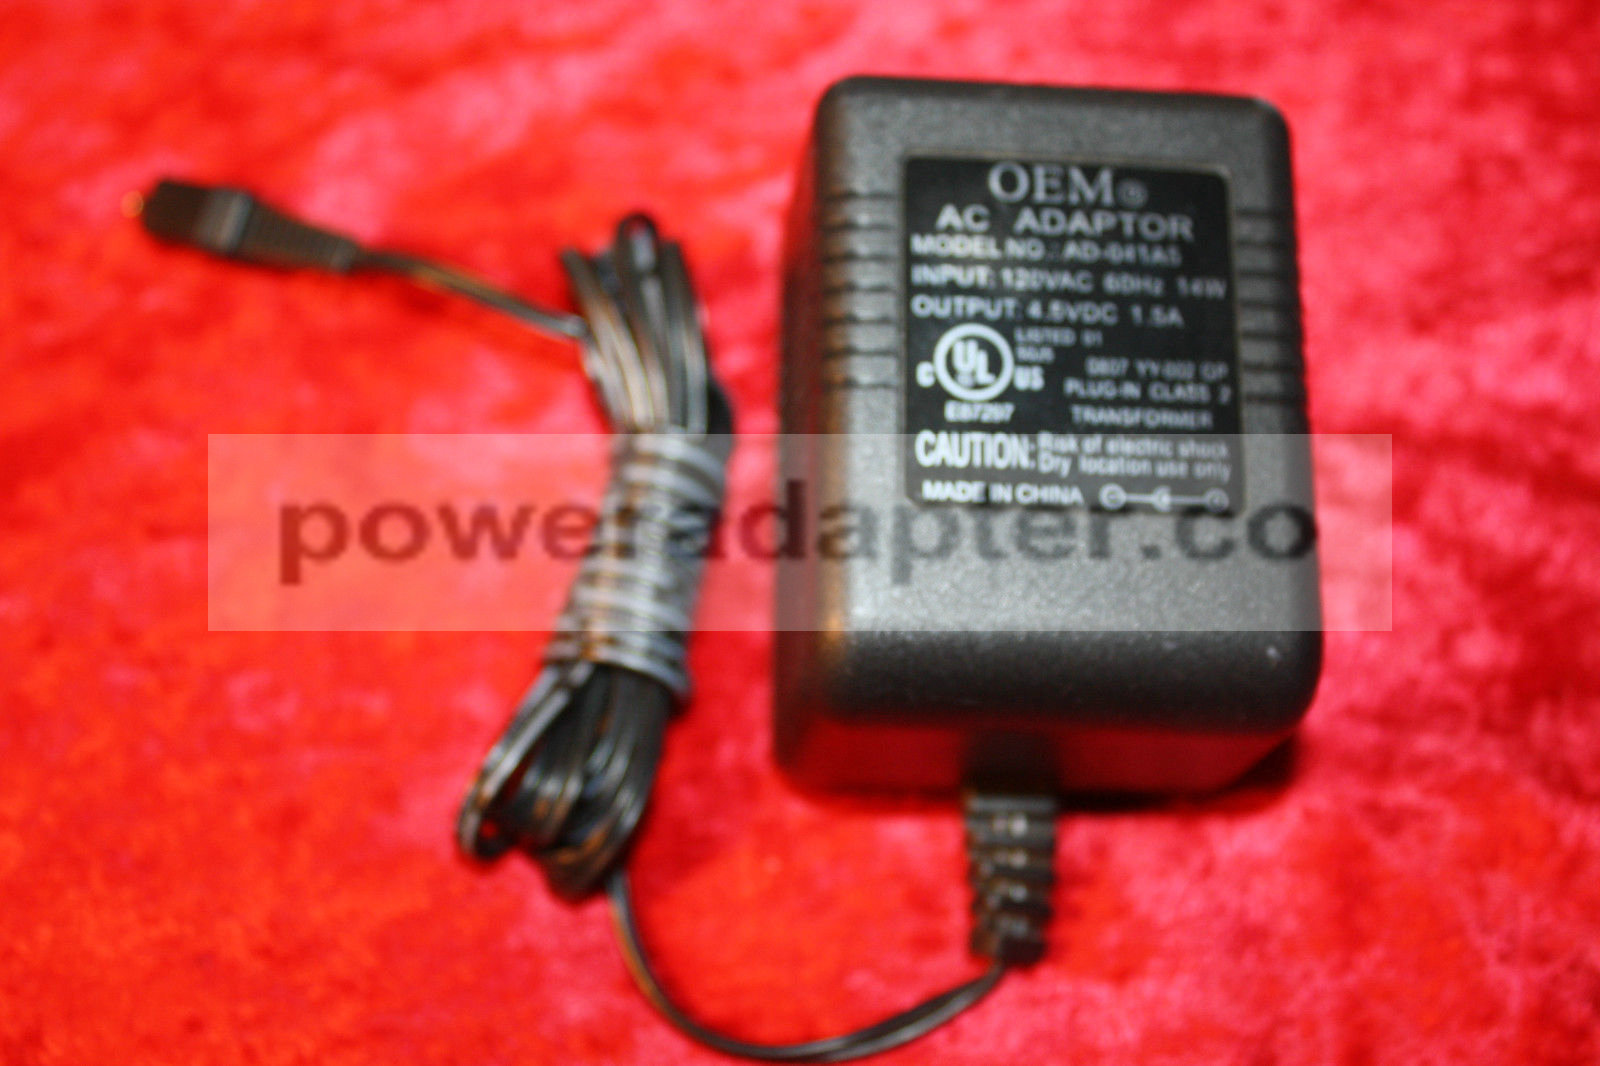 Power Supply Adapter OEM AD-041A5 AC / DC 4.5v 1.5amp Condition: new Brand: OEM AC / DC Type: AC / DC Model: AD-0